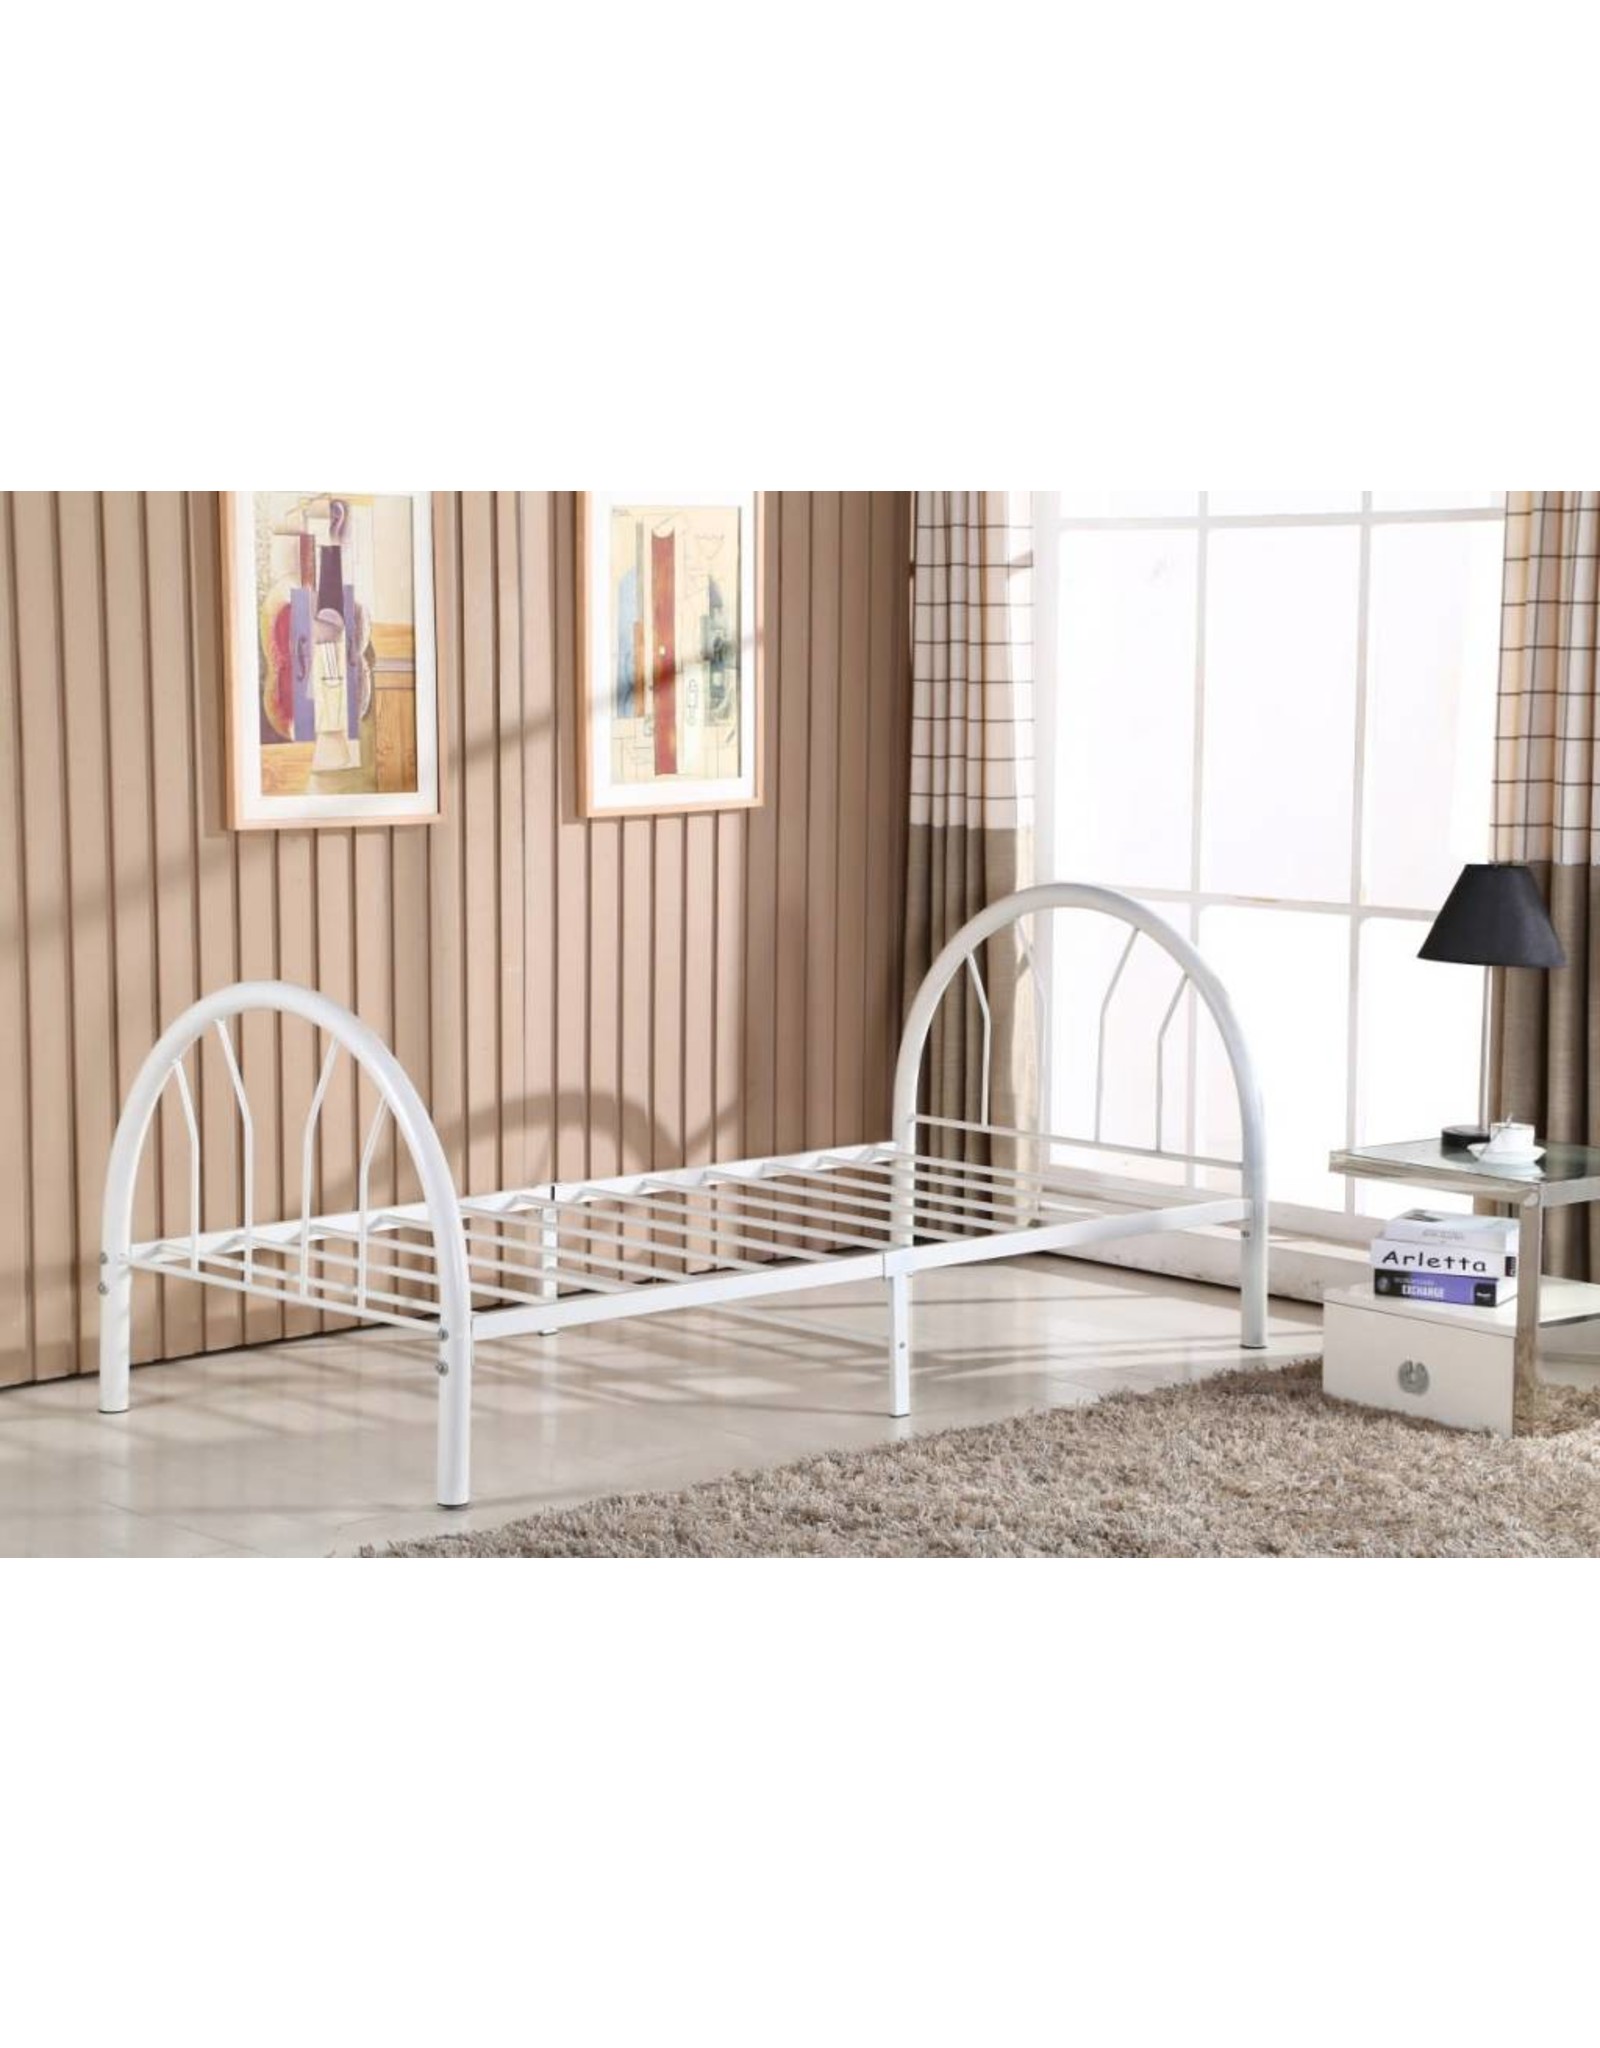 GR-215 White Twin Bed